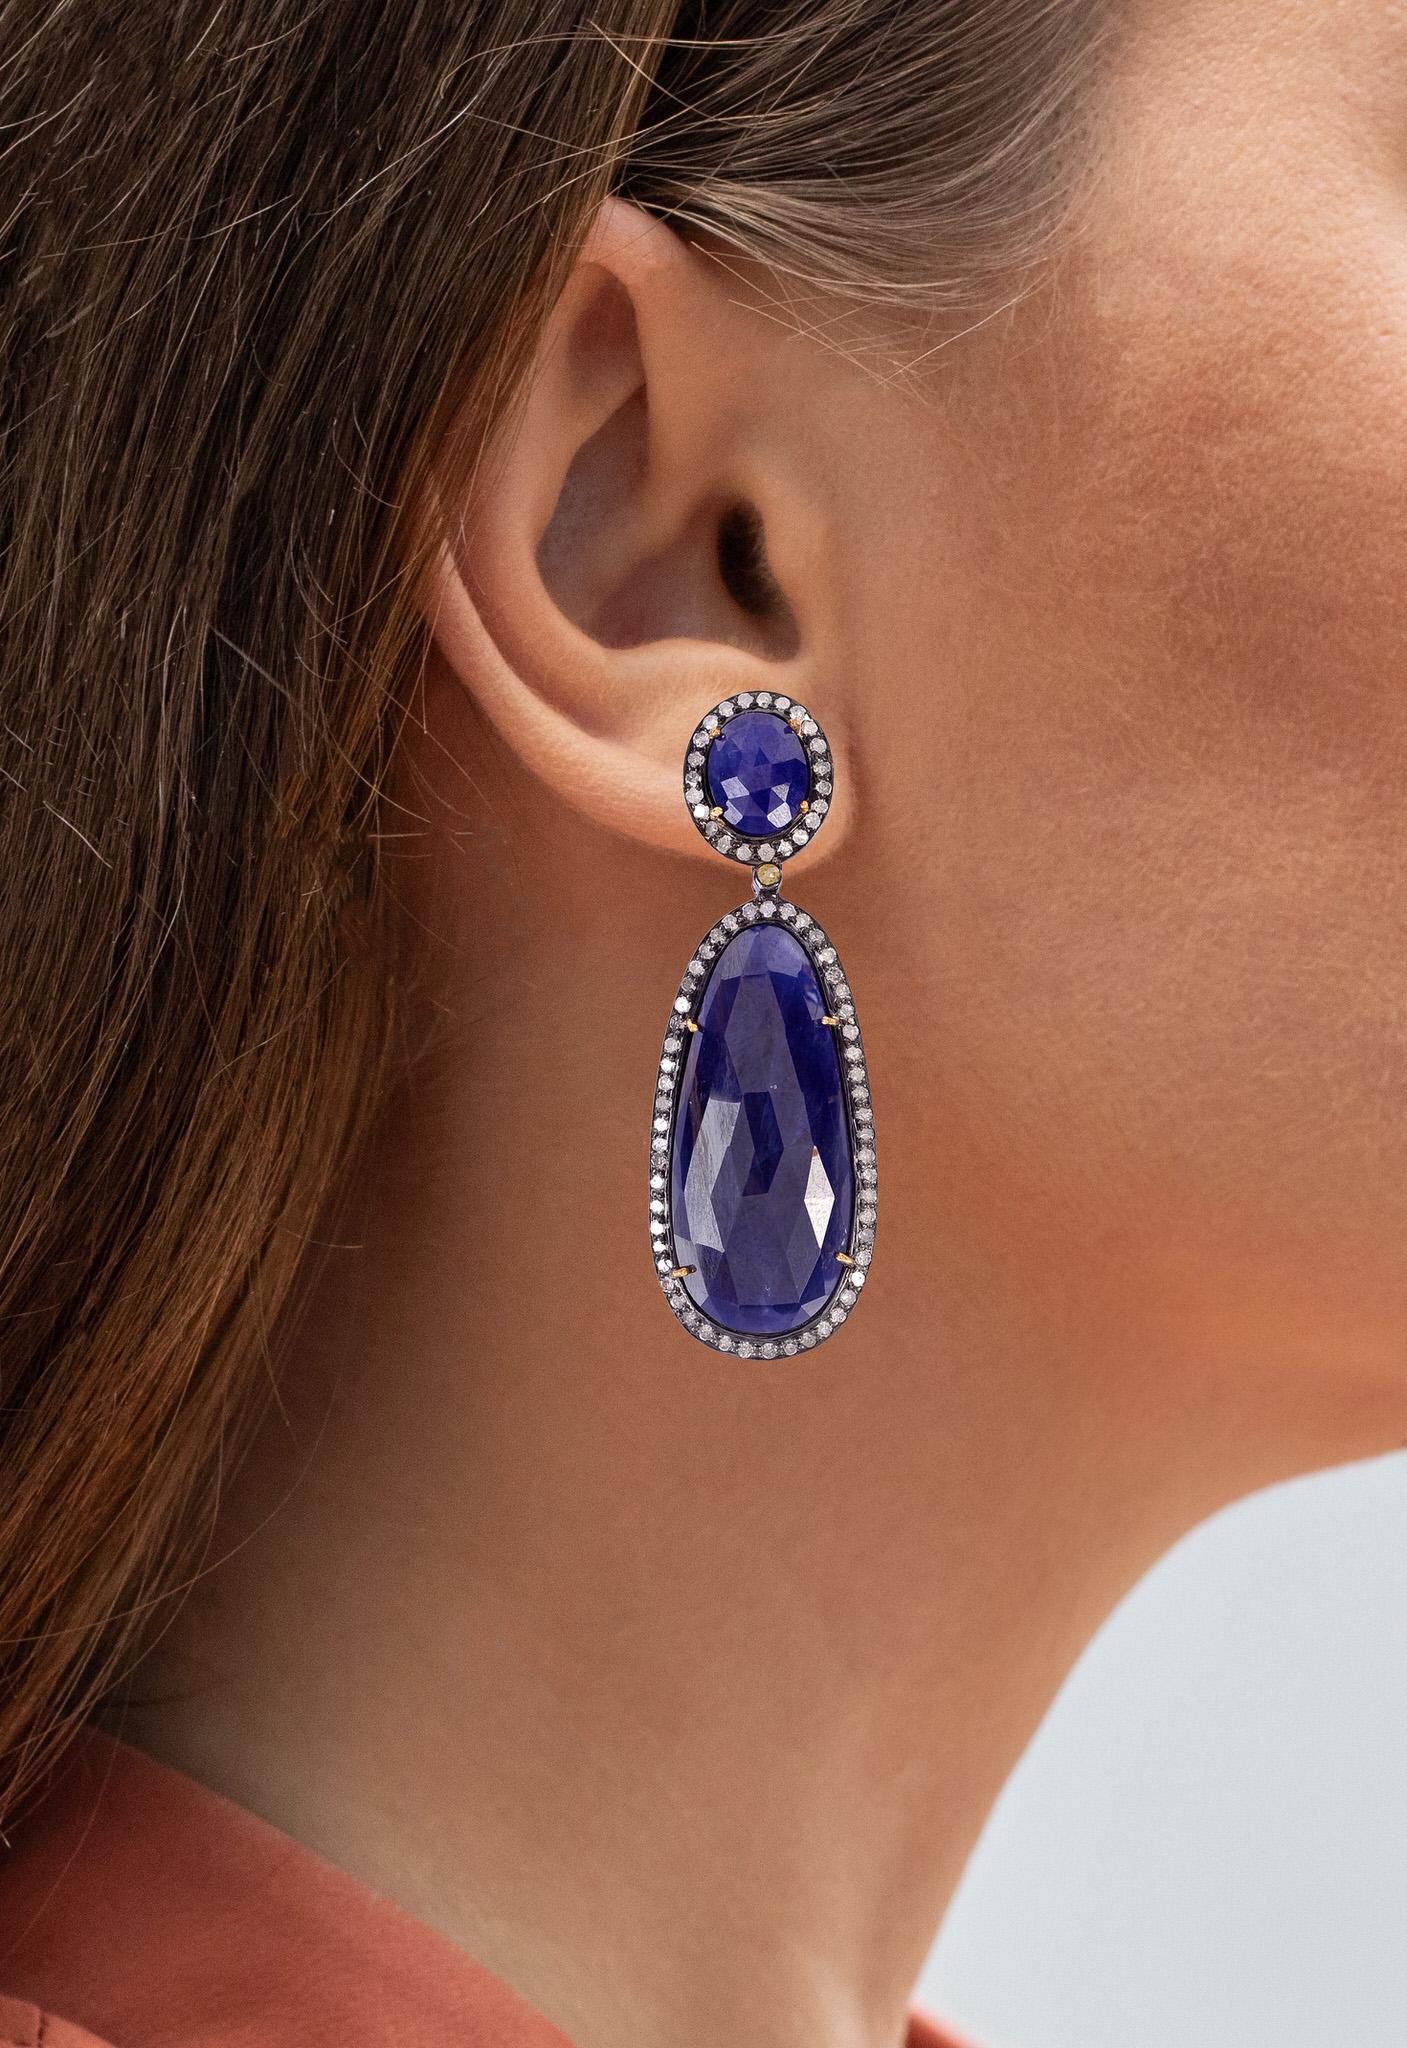 It comes with the appraisal by GIA GG/AJP
All Gemstones are Natural
Sapphires = 55.25 Carats
Diamonds = 2.19 Carats
Cut: Mixed Cut
Earrings Dimensions: 58 x 20 mm
Metal: 18K Gold & Silver